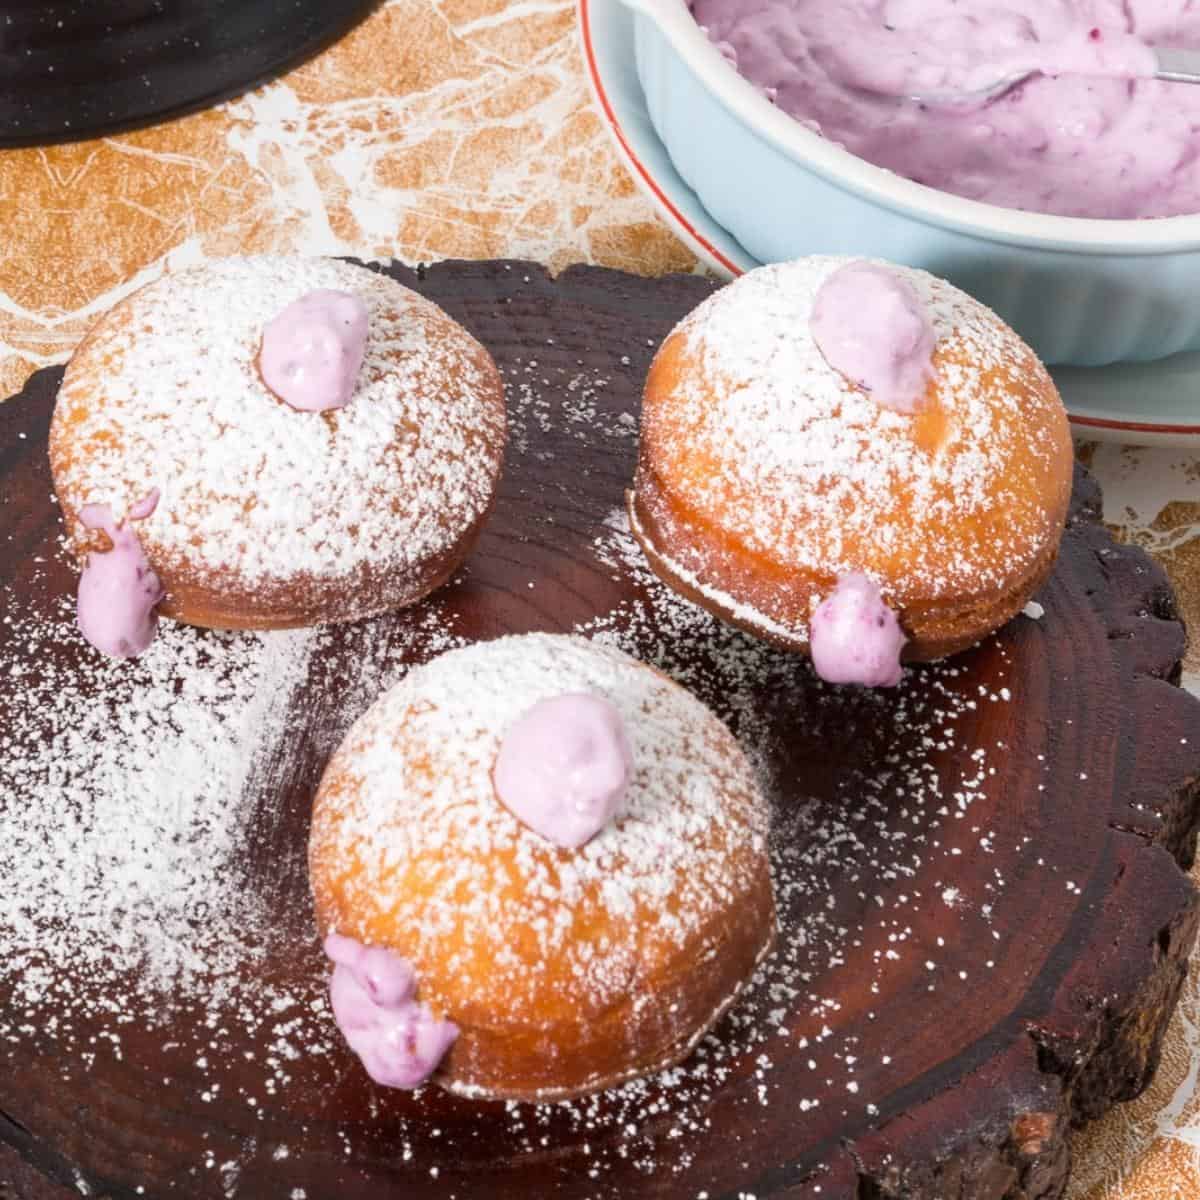 Donuts fill with blackberry cream on a wooden baord